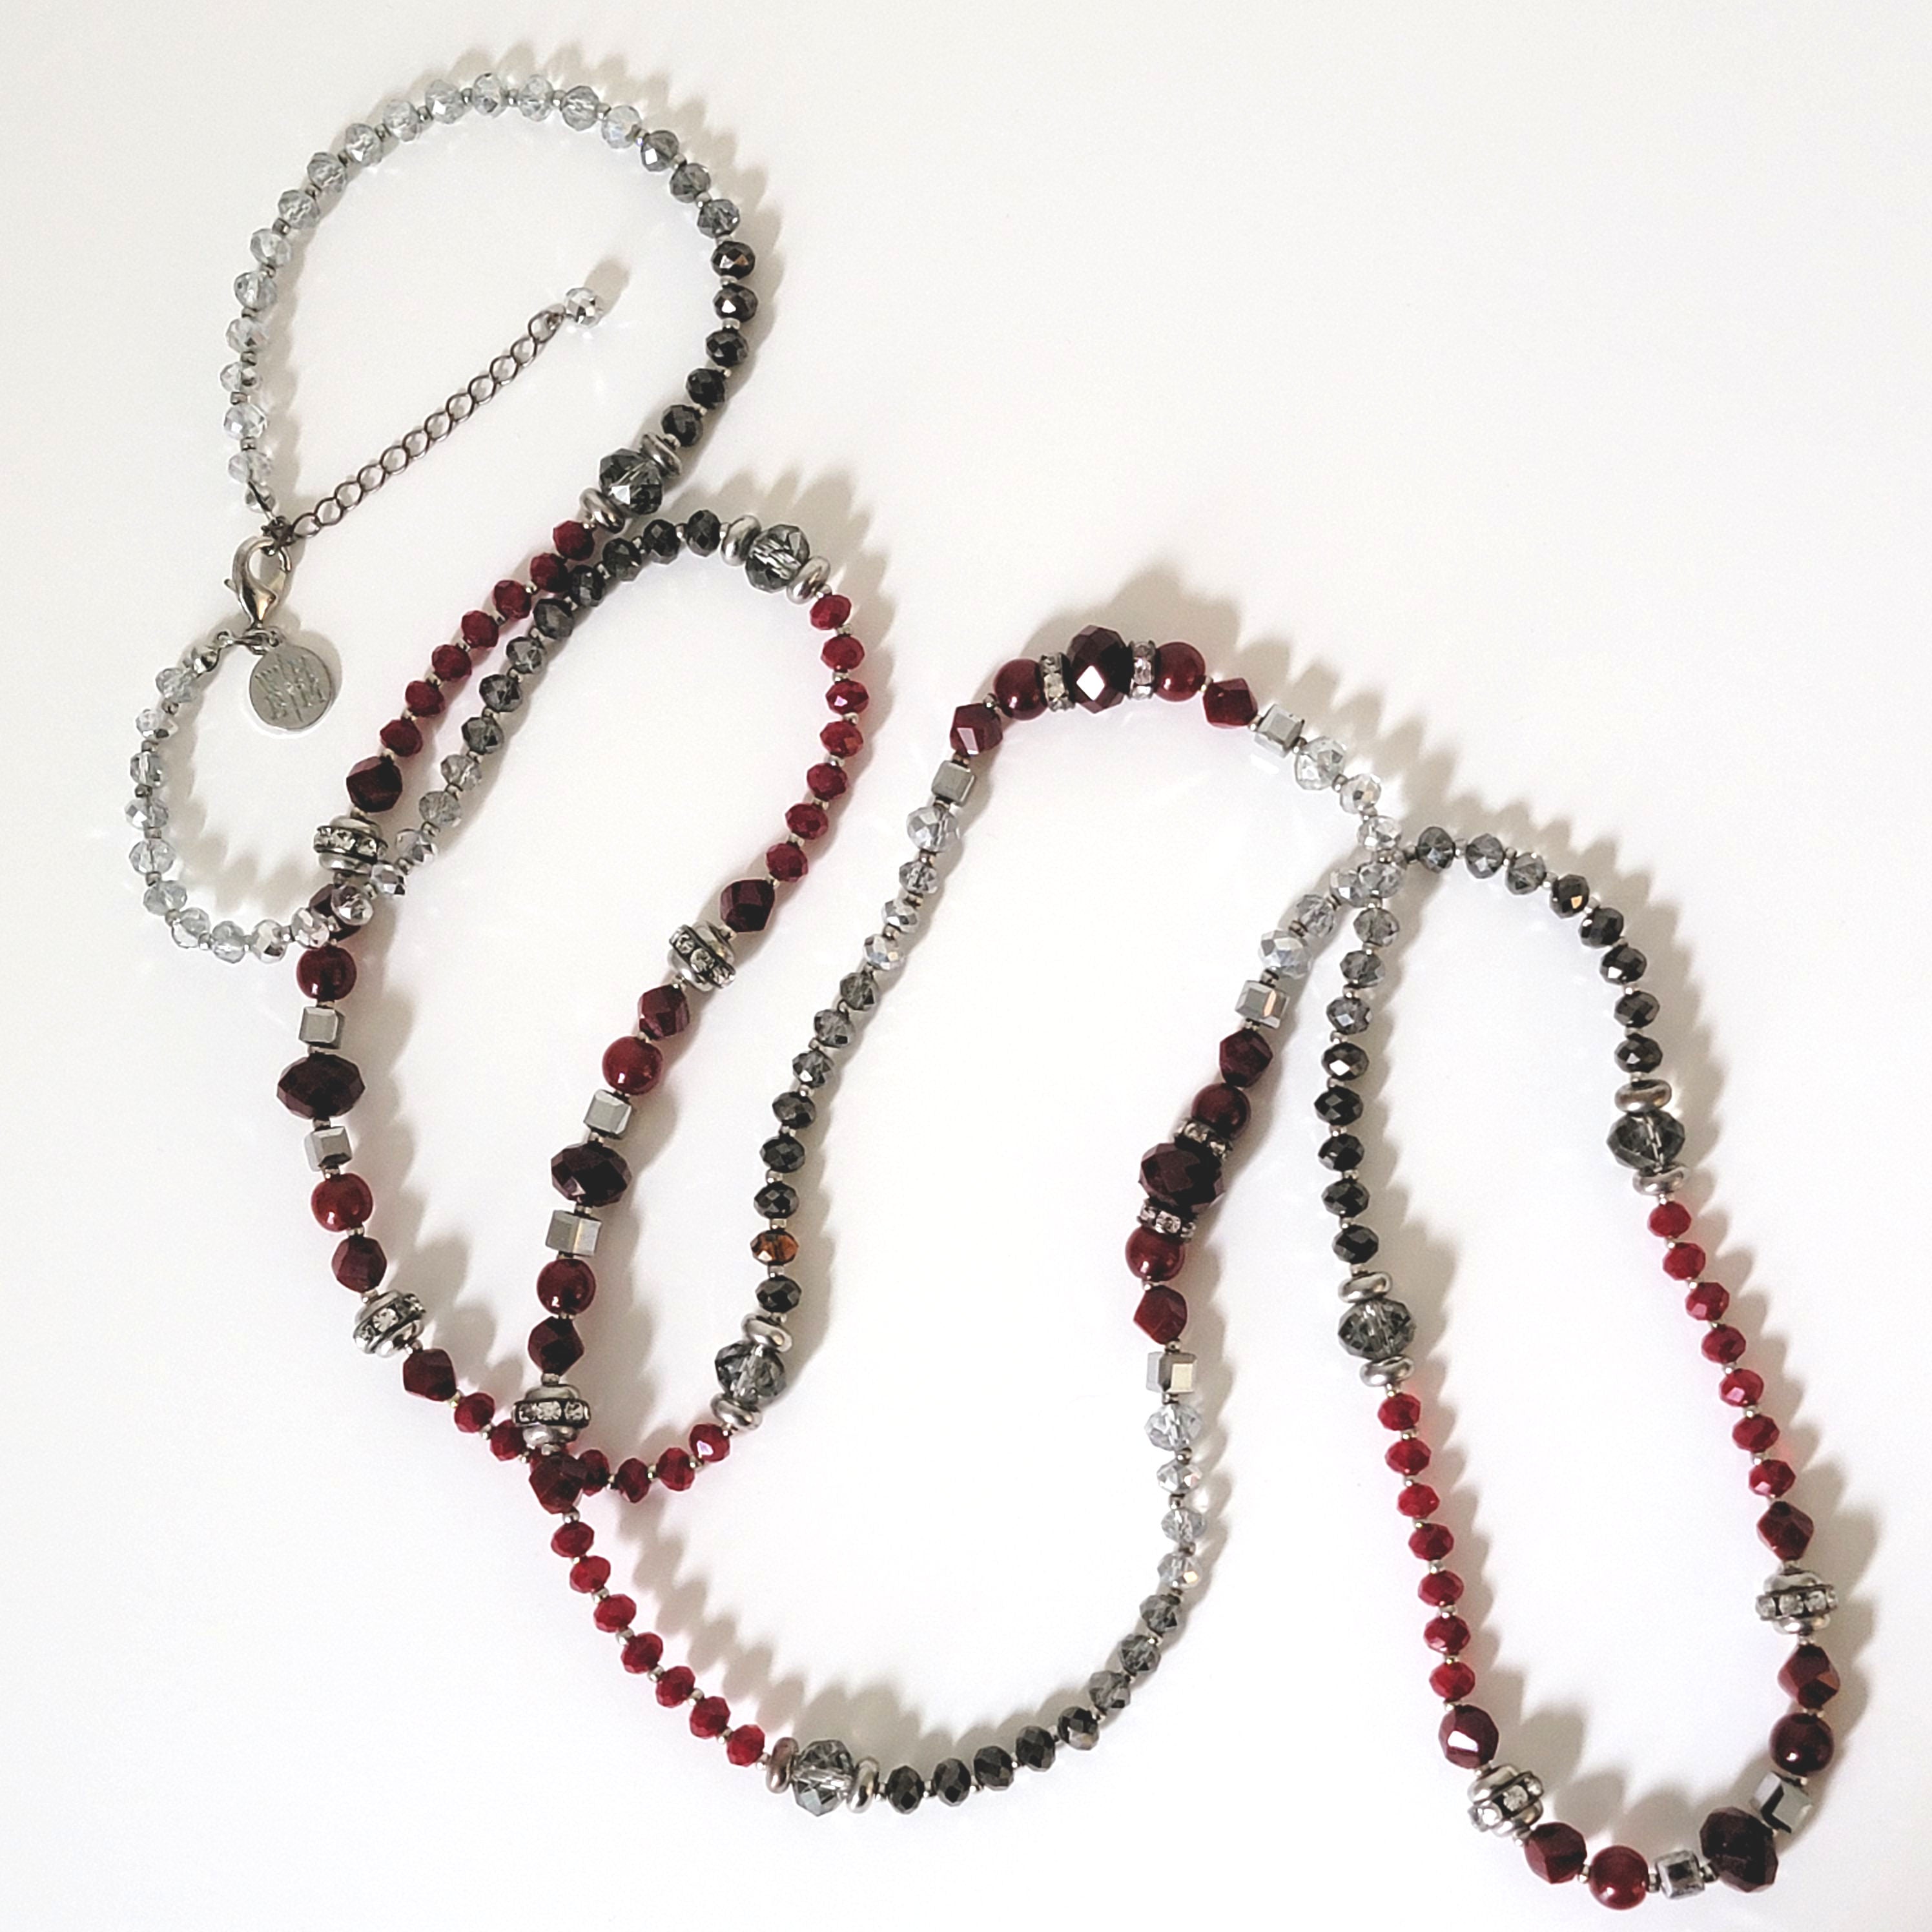 Anisa Antique Black Beads Necklace - Center Red | Black bead necklace, Beaded  necklace designs, Beaded necklace